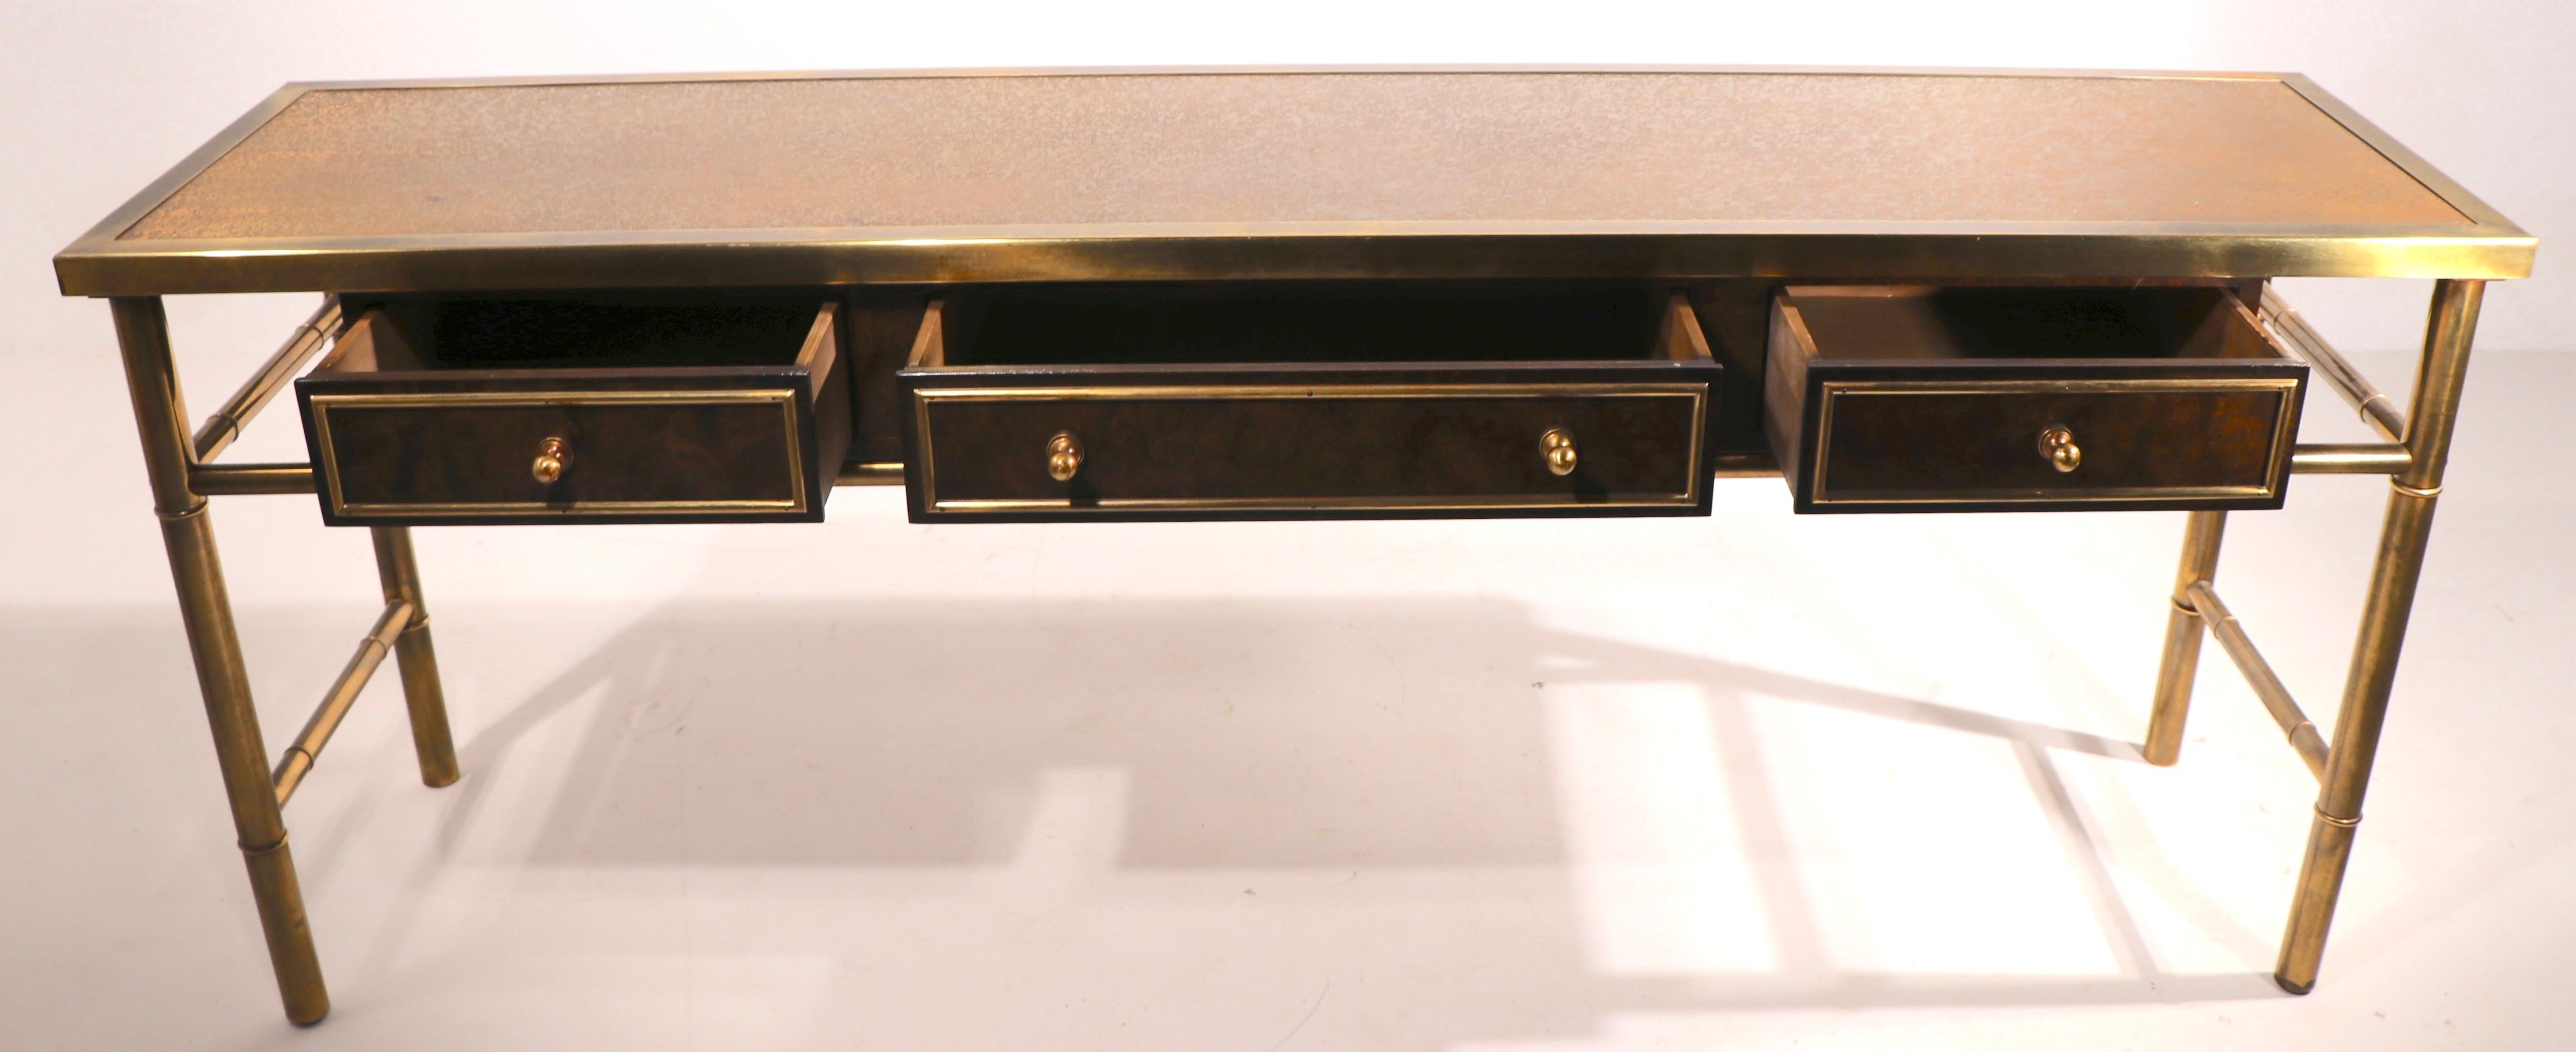 Mastercraft Console Sideboard Server in Brass and Wood 6